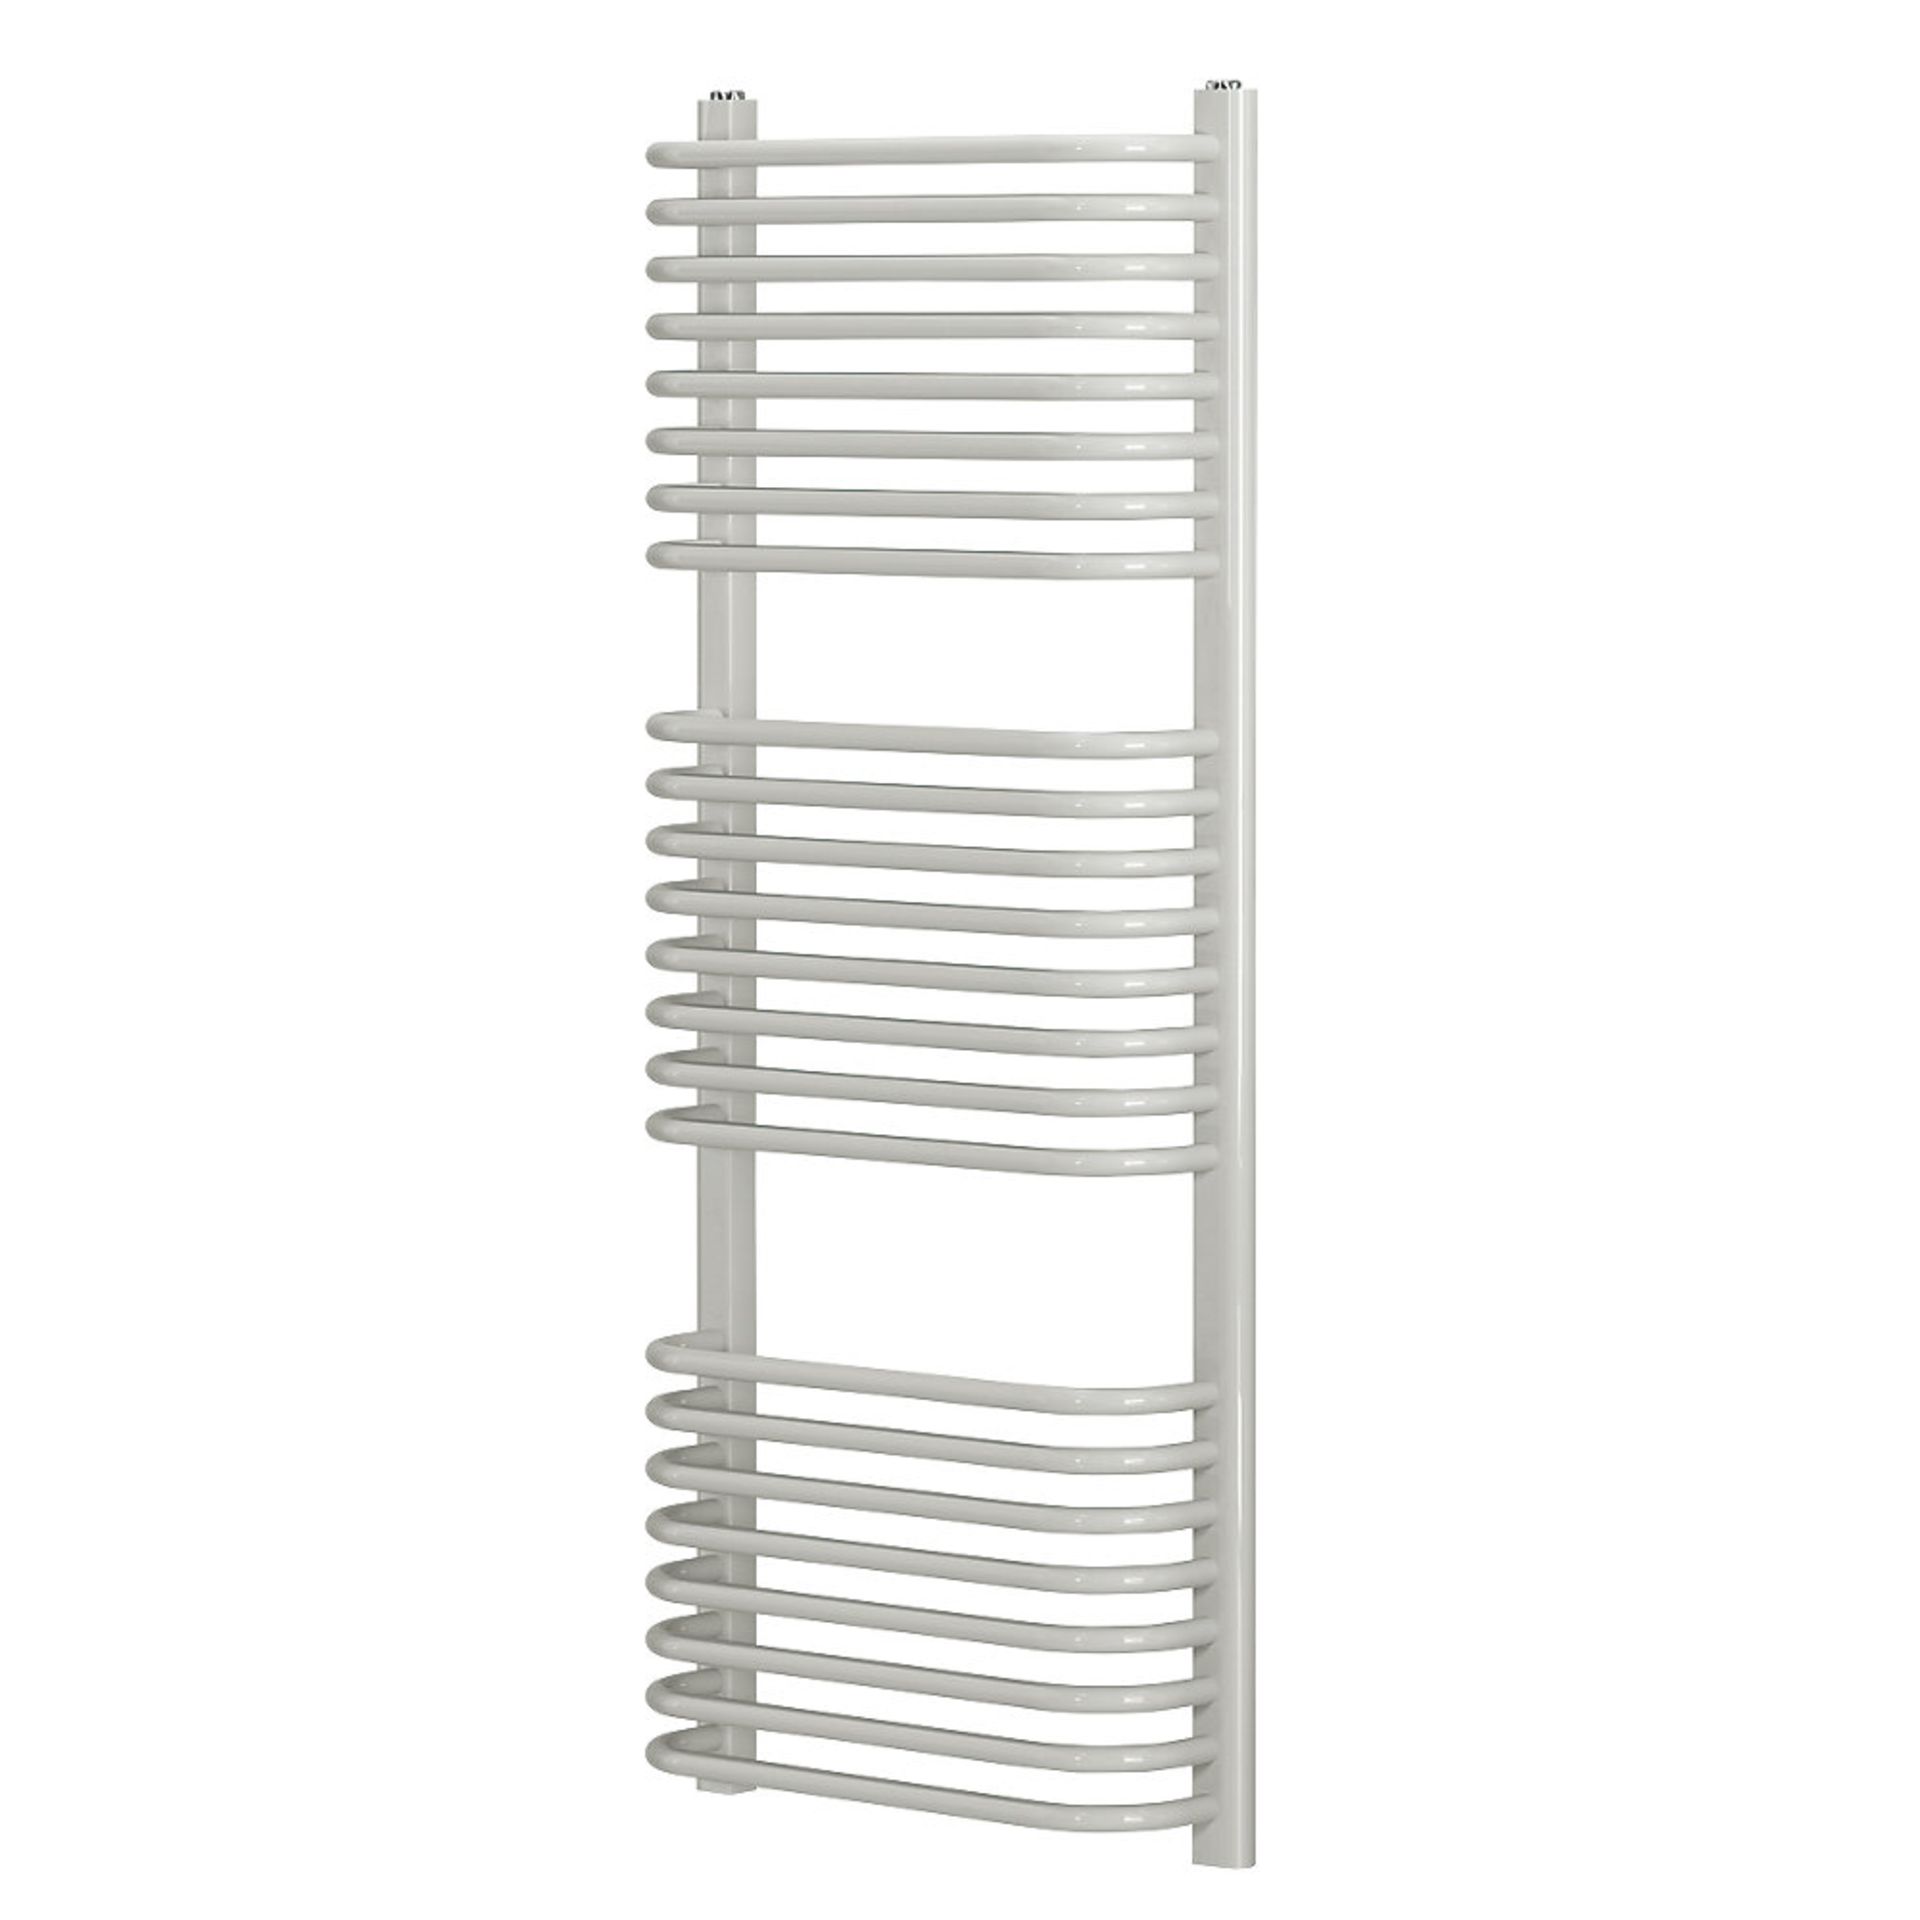 (PP204) 1200 X 500MM CURVED D-BAR TOWEL RADIATORR WHITE. High quality powder-coated steel con... - Image 2 of 2